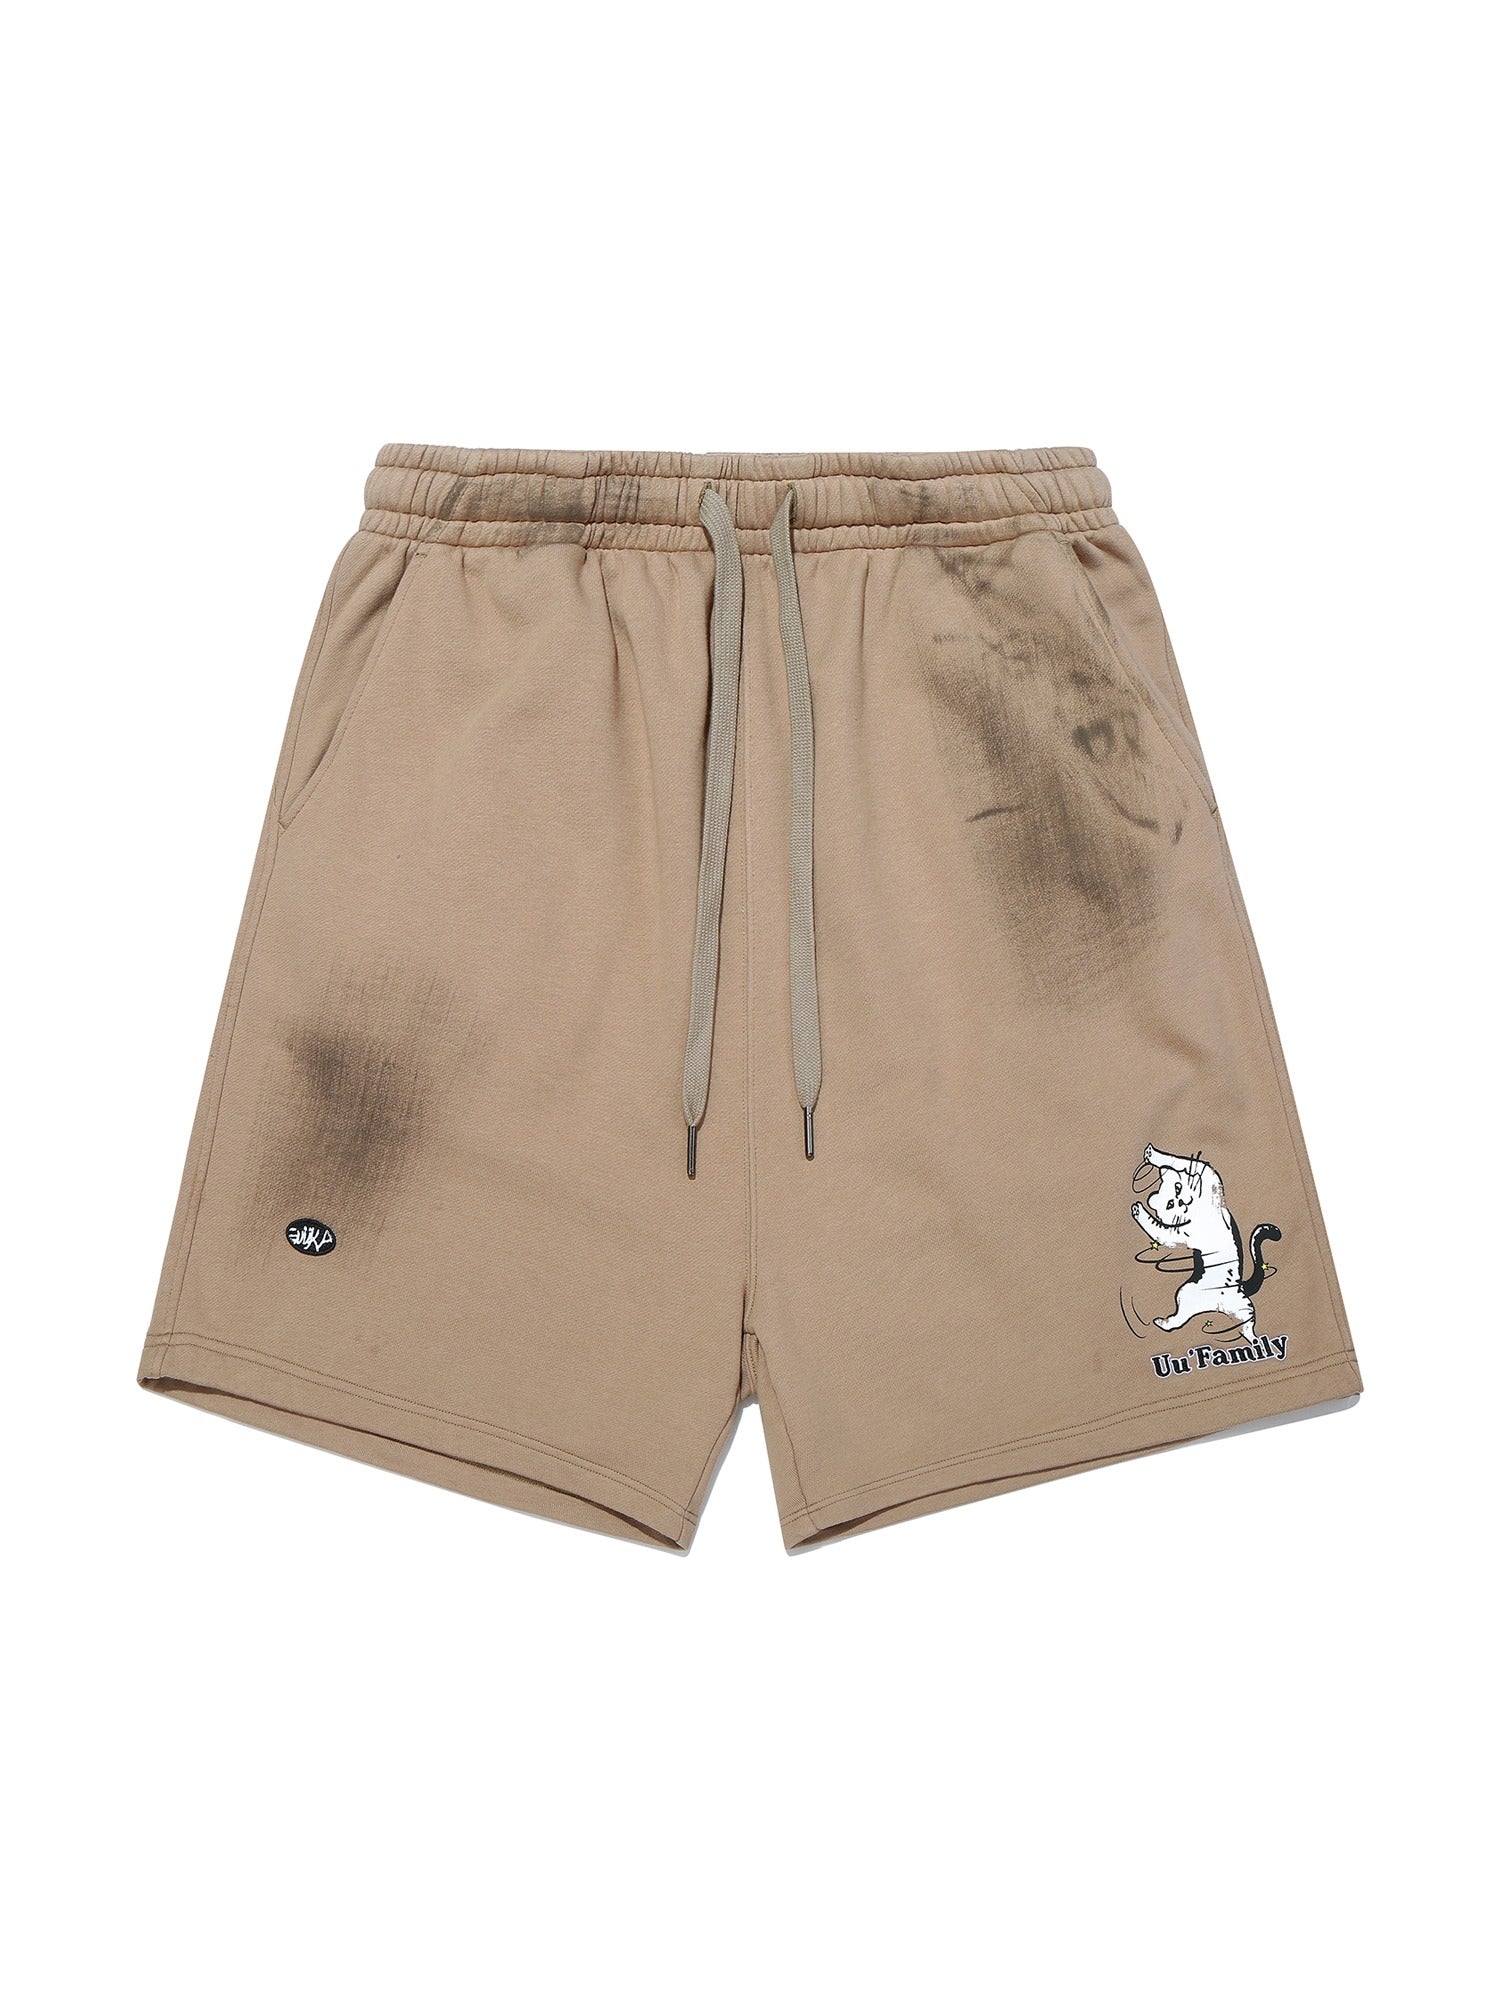 Khaki cat-printed cropped shorts for men in a relaxed fit.